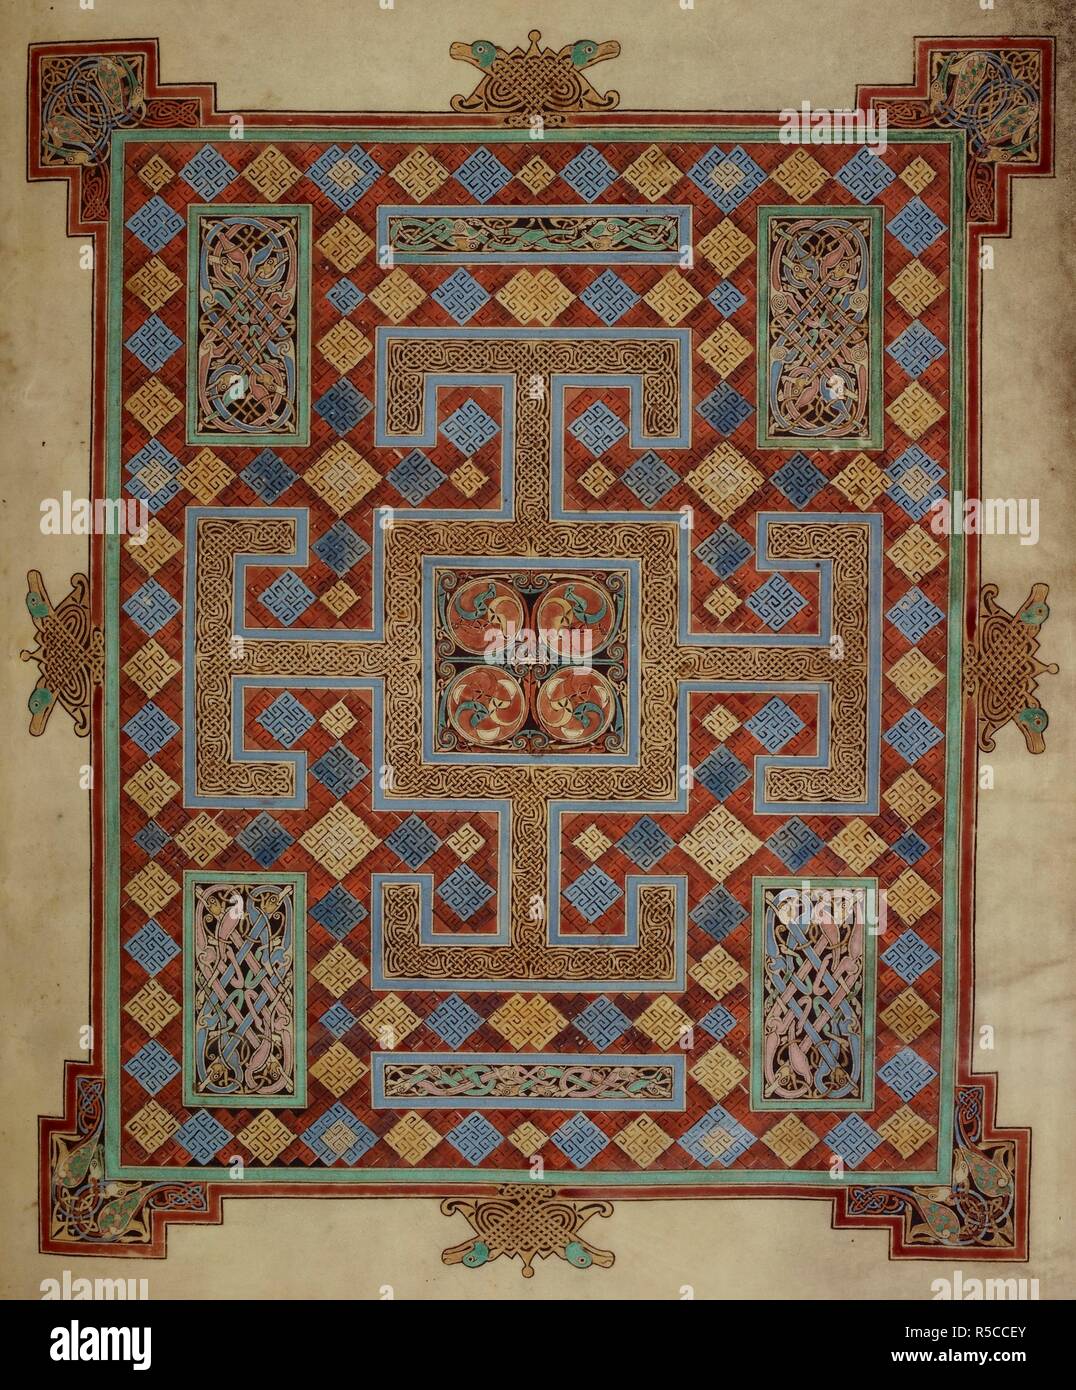 Carpet page. Lindisfarne Gospels. N.E. England [Lindisfarne]; 710-721. (Whole folio) Carpet page introducing St Luke's Gospel.  Image taken from Lindisfarne Gospels.  Originally published/produced in N.E. England [Lindisfarne]; 710-721. . Source: Cotton Nero D. IV, f.138v. Language: Latin with Anglo-Sax. Stock Photo